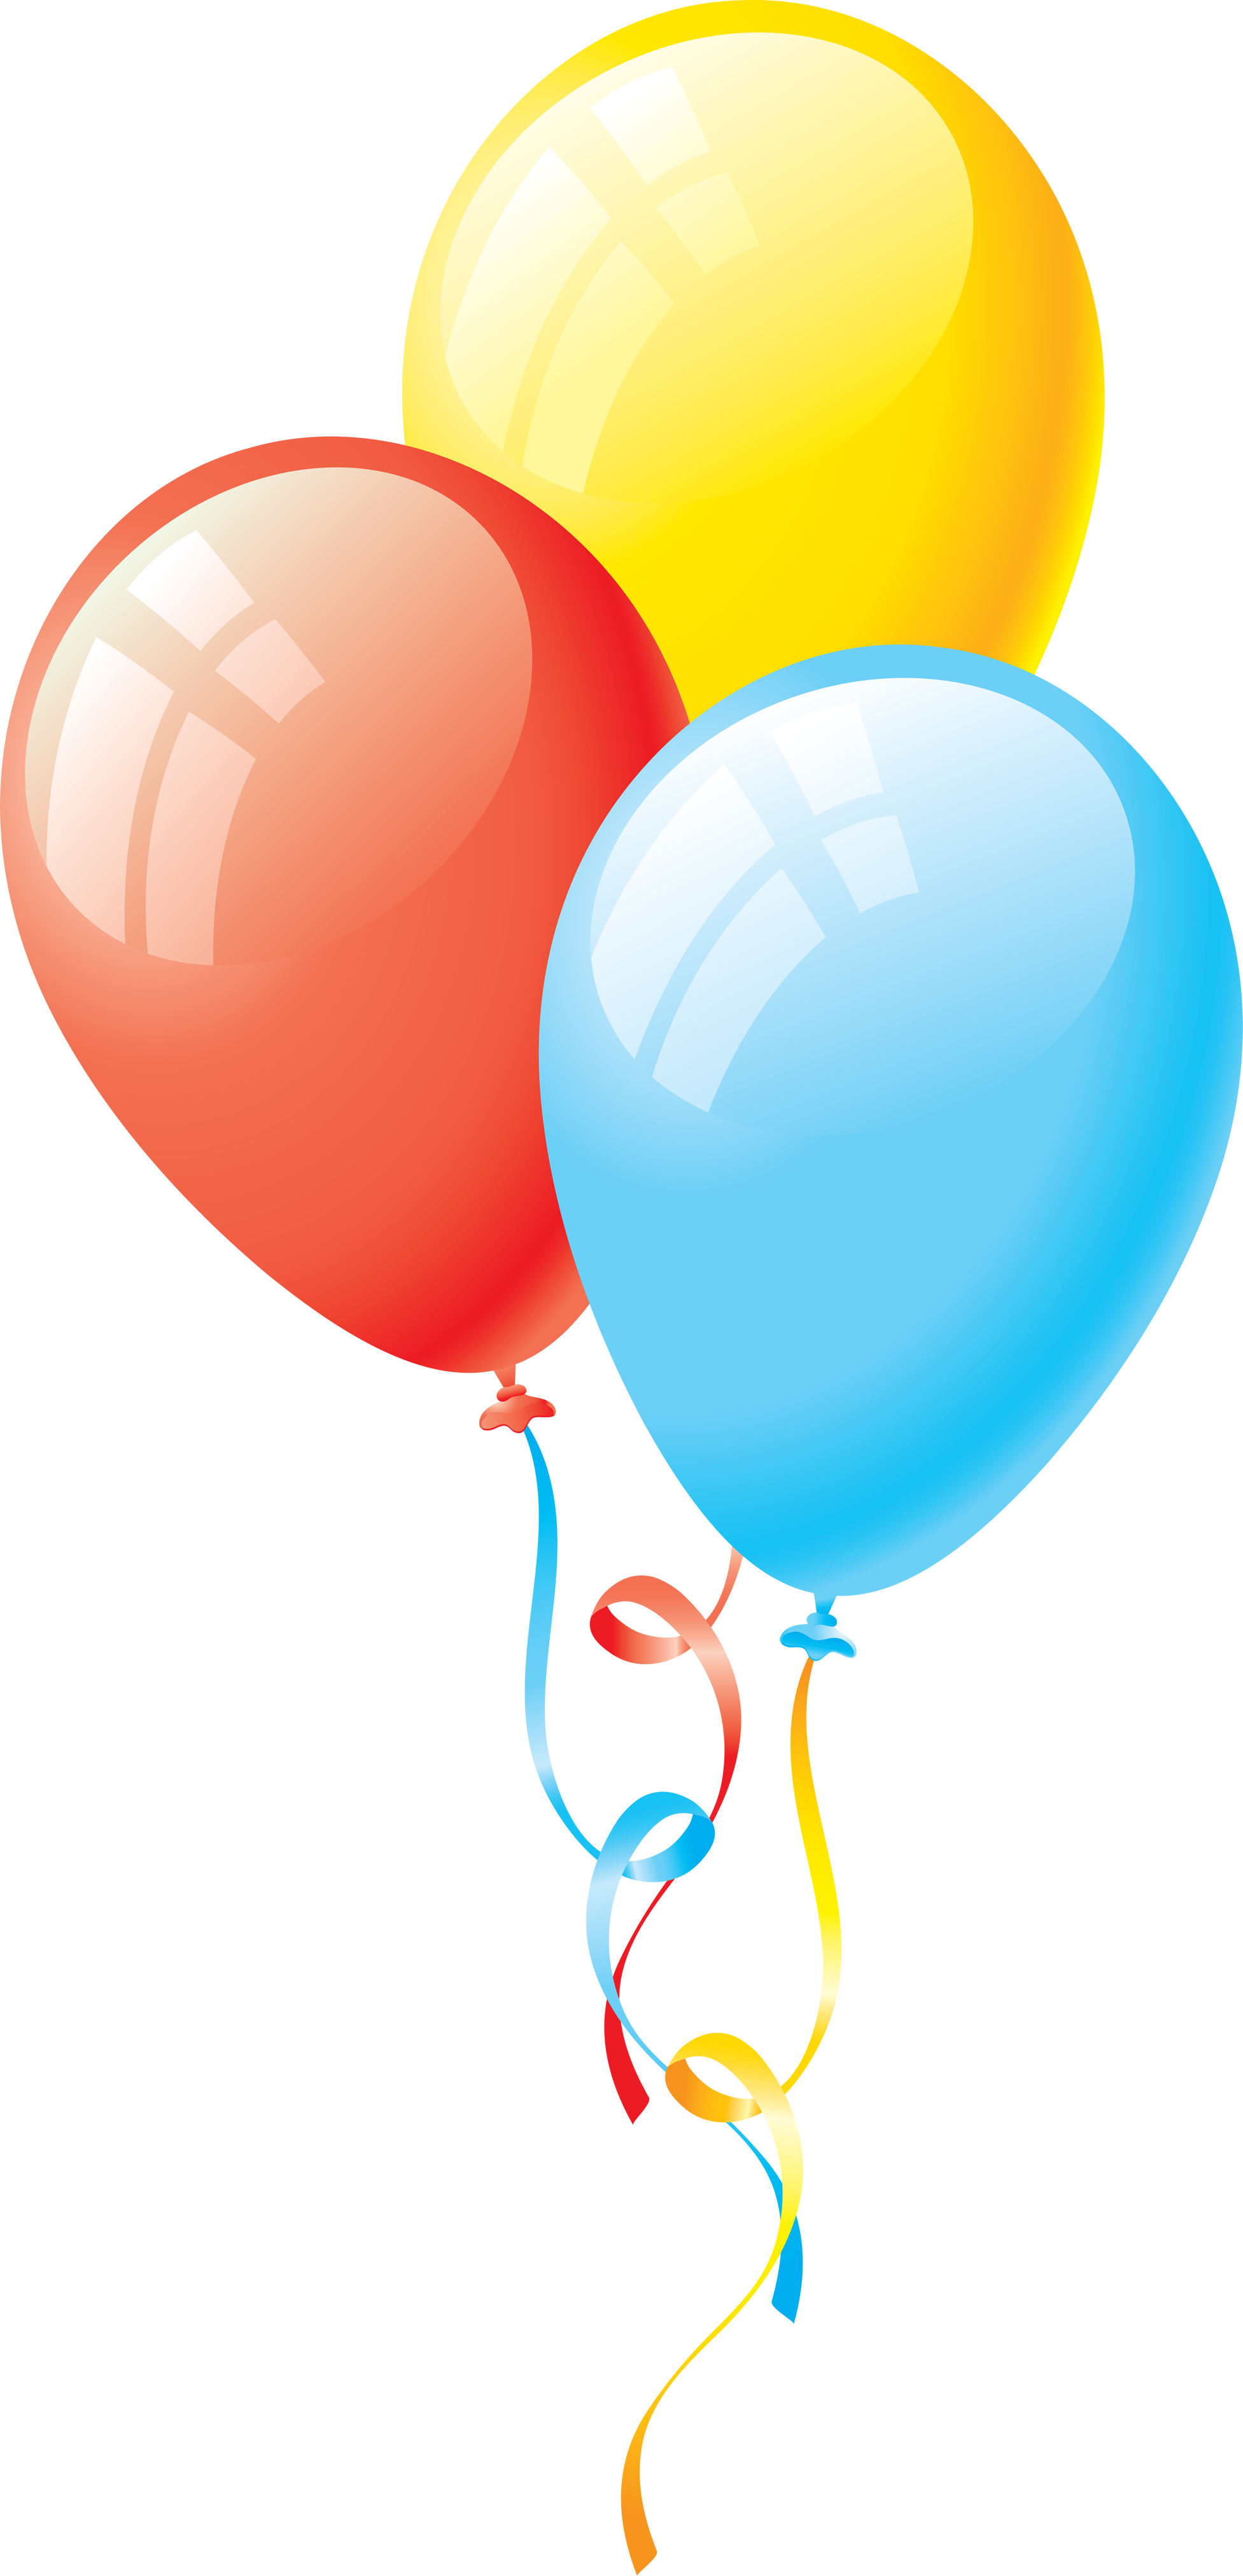 Colorful Birthday Balloons PNG Image